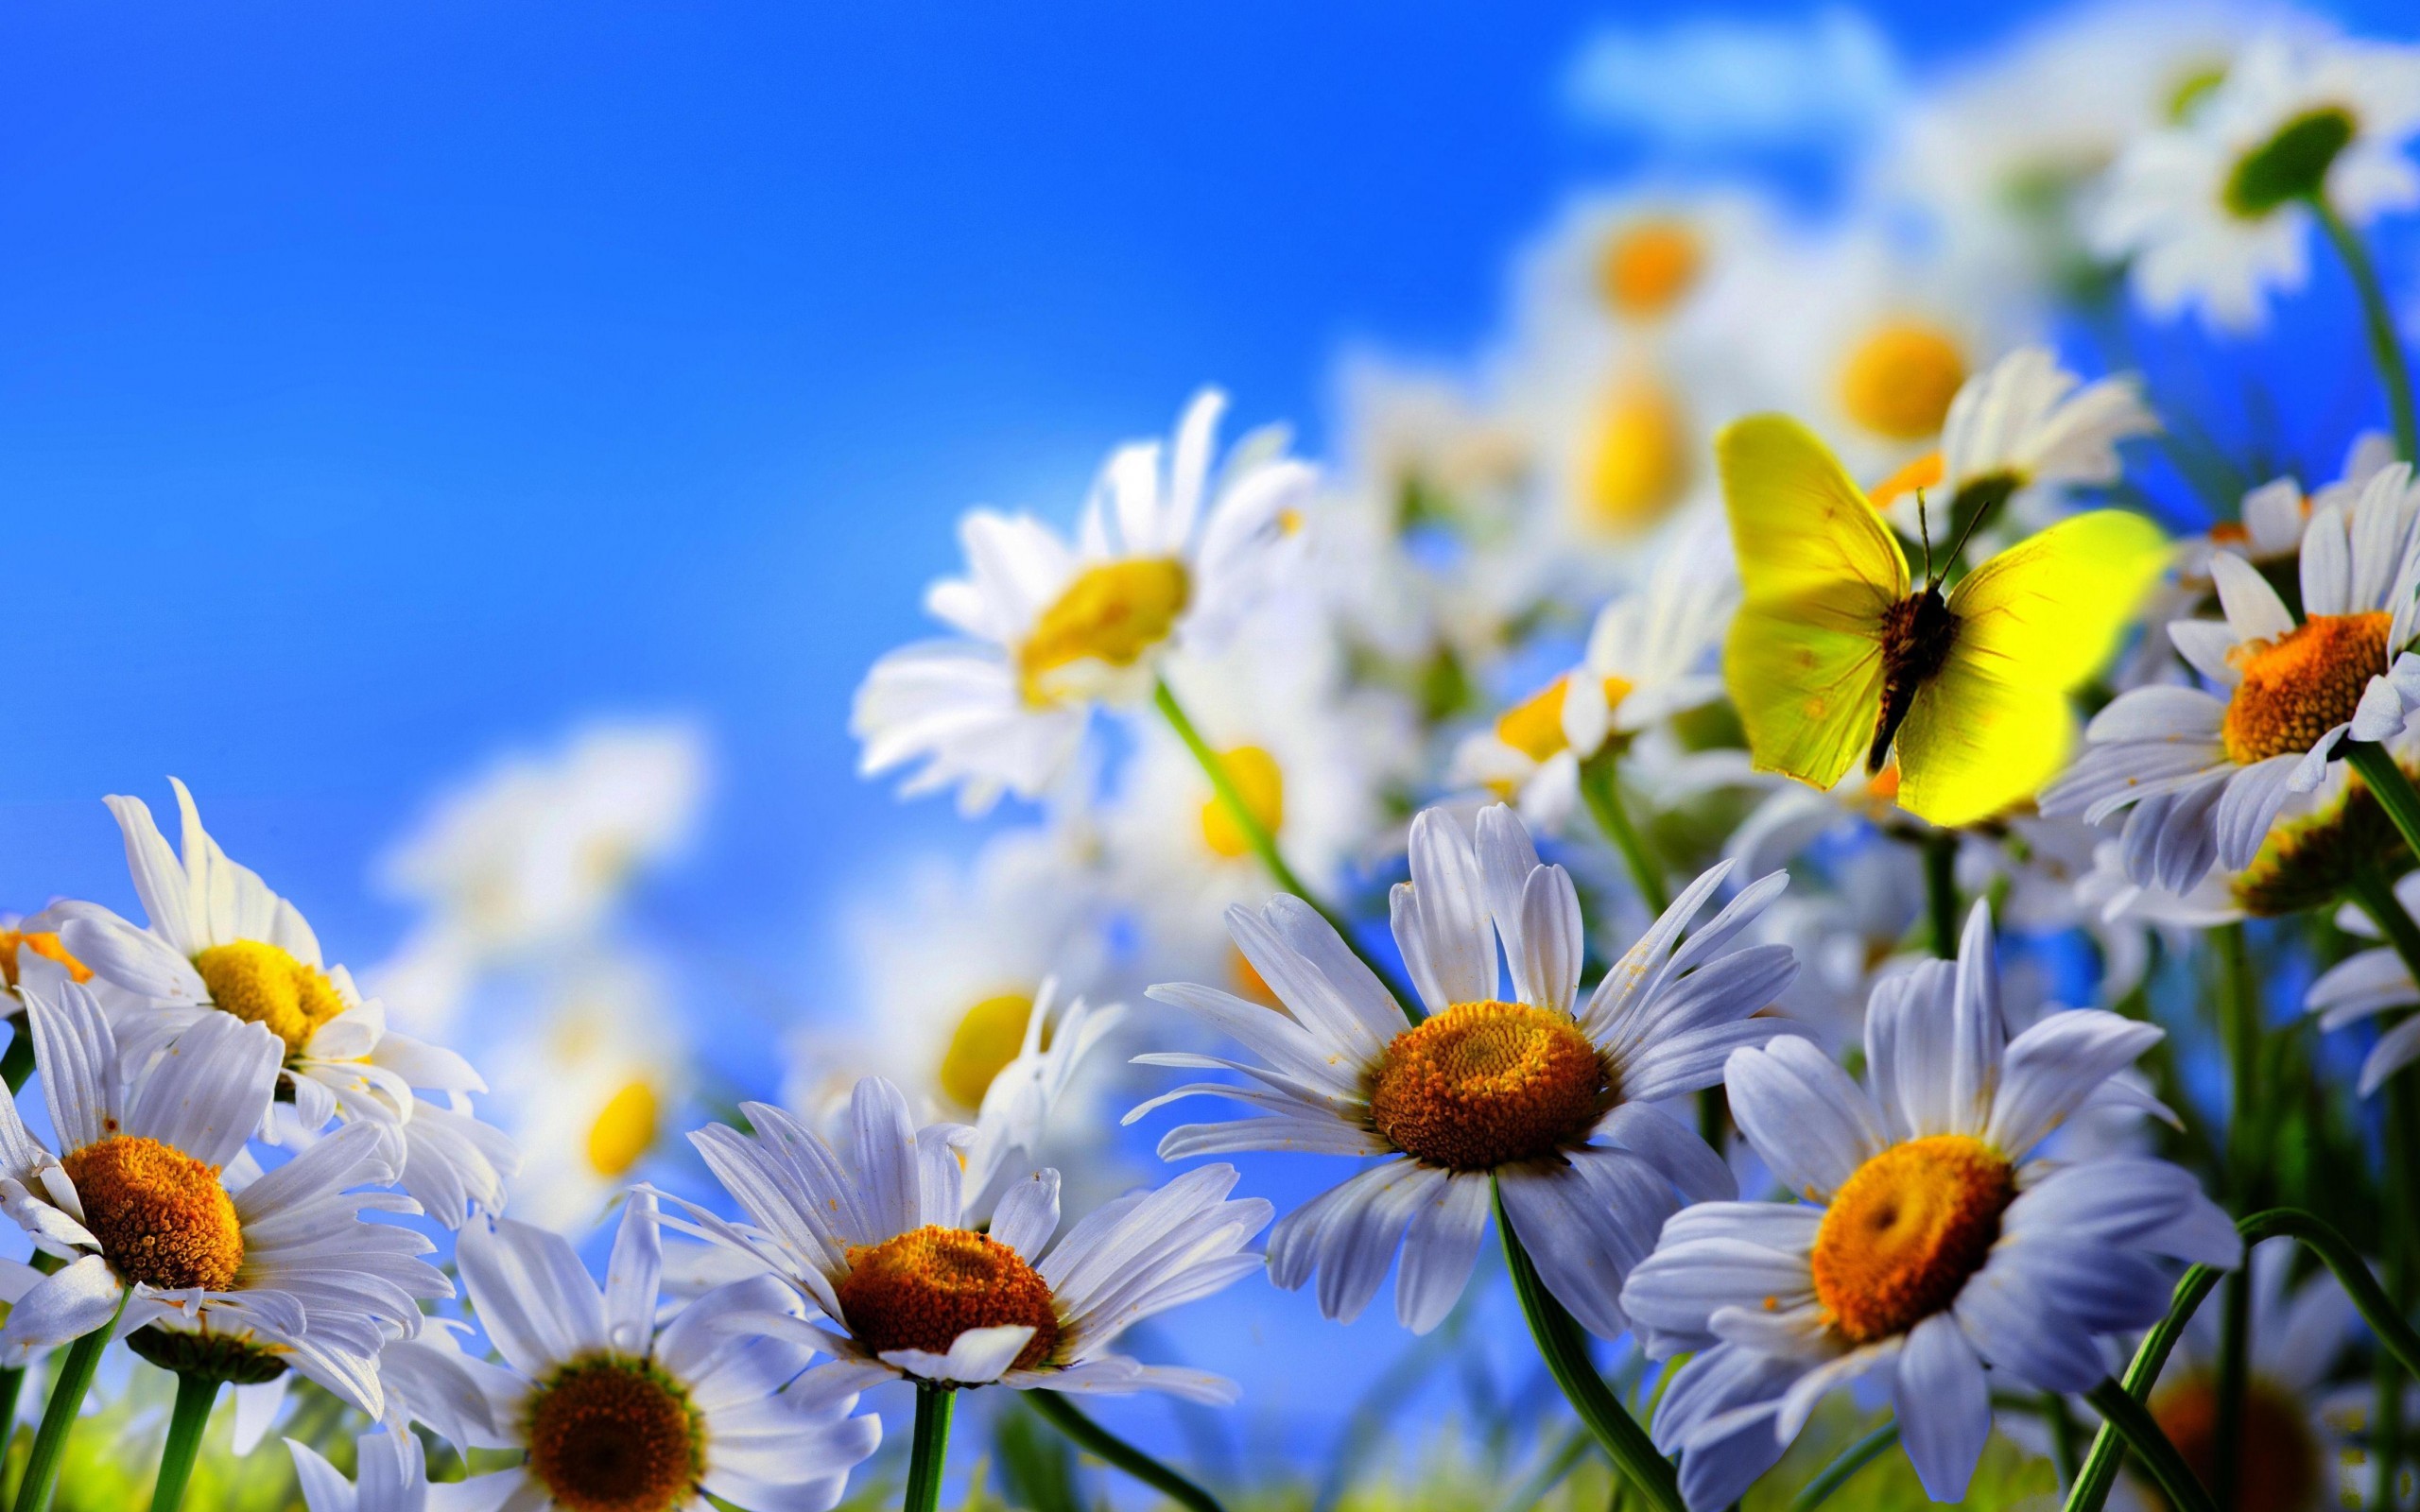 butterflies, blue, insects, flowers, plants, camomile